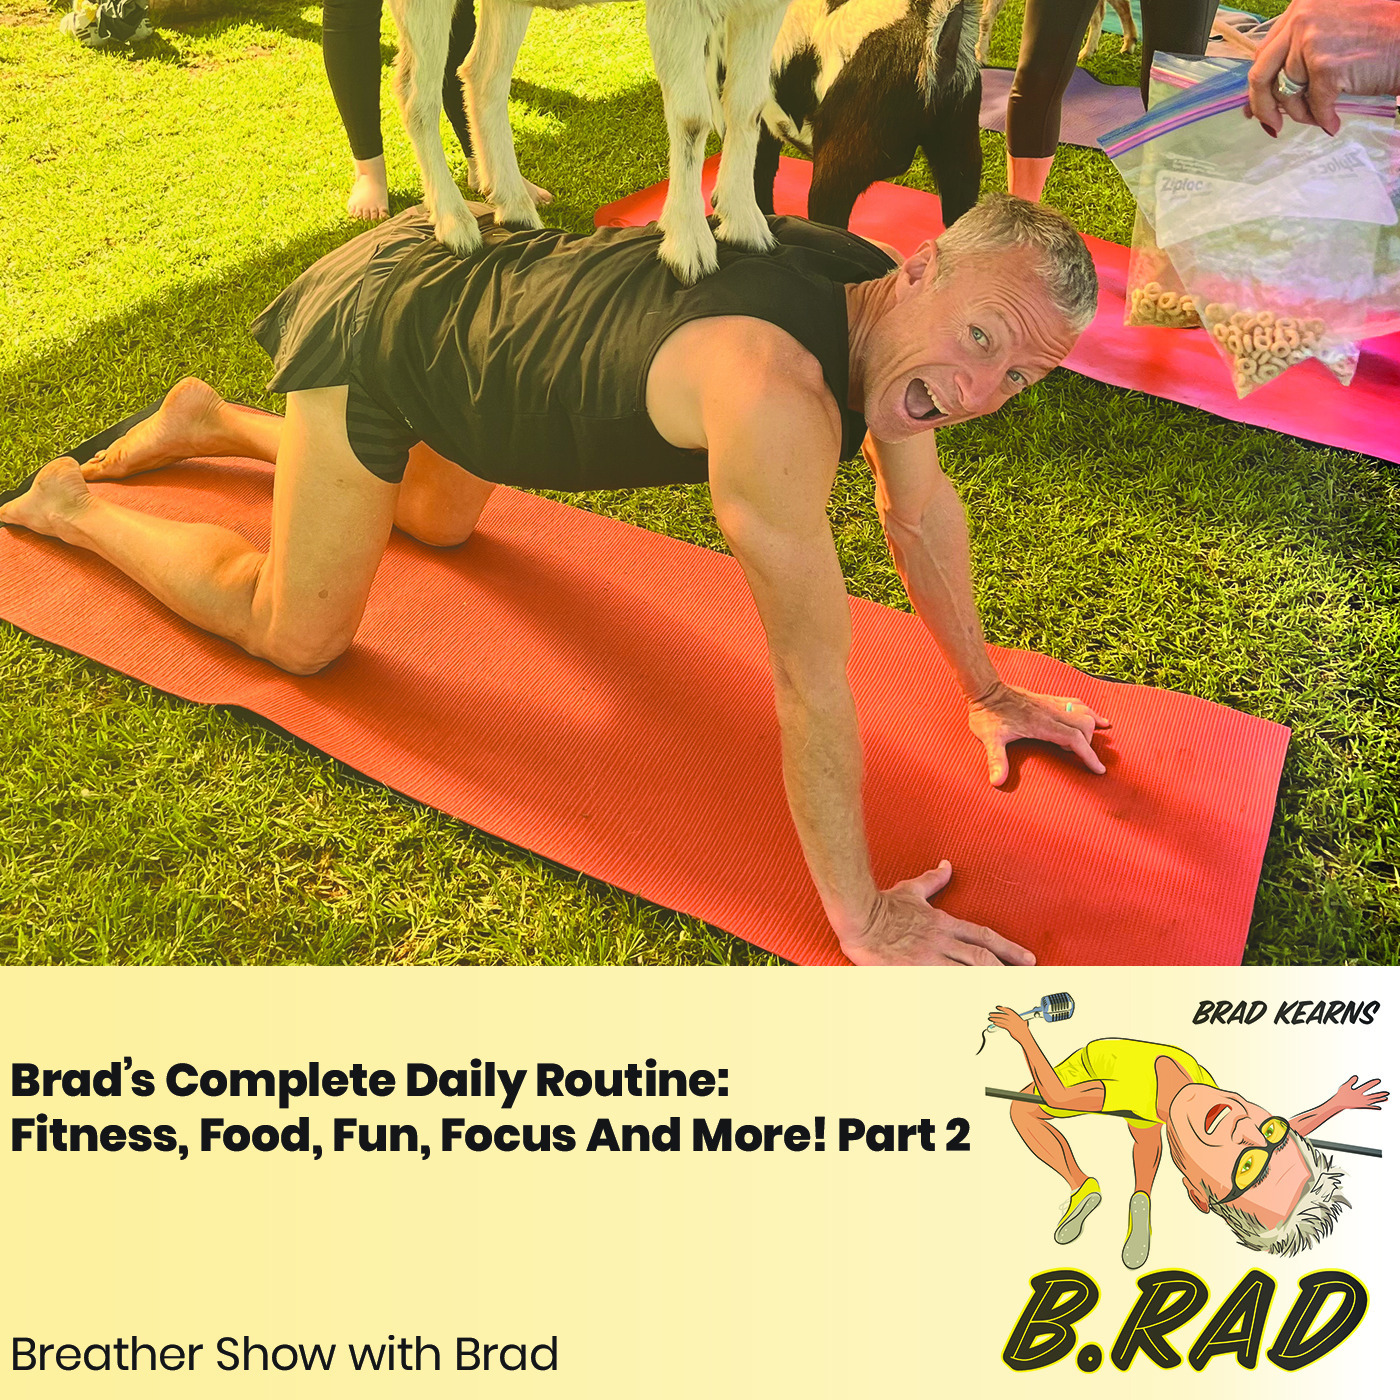 Brad’s Daily Routine: Fitness, Food, Fun, Focus And More! Part 2 (Breather Episode with Brad)